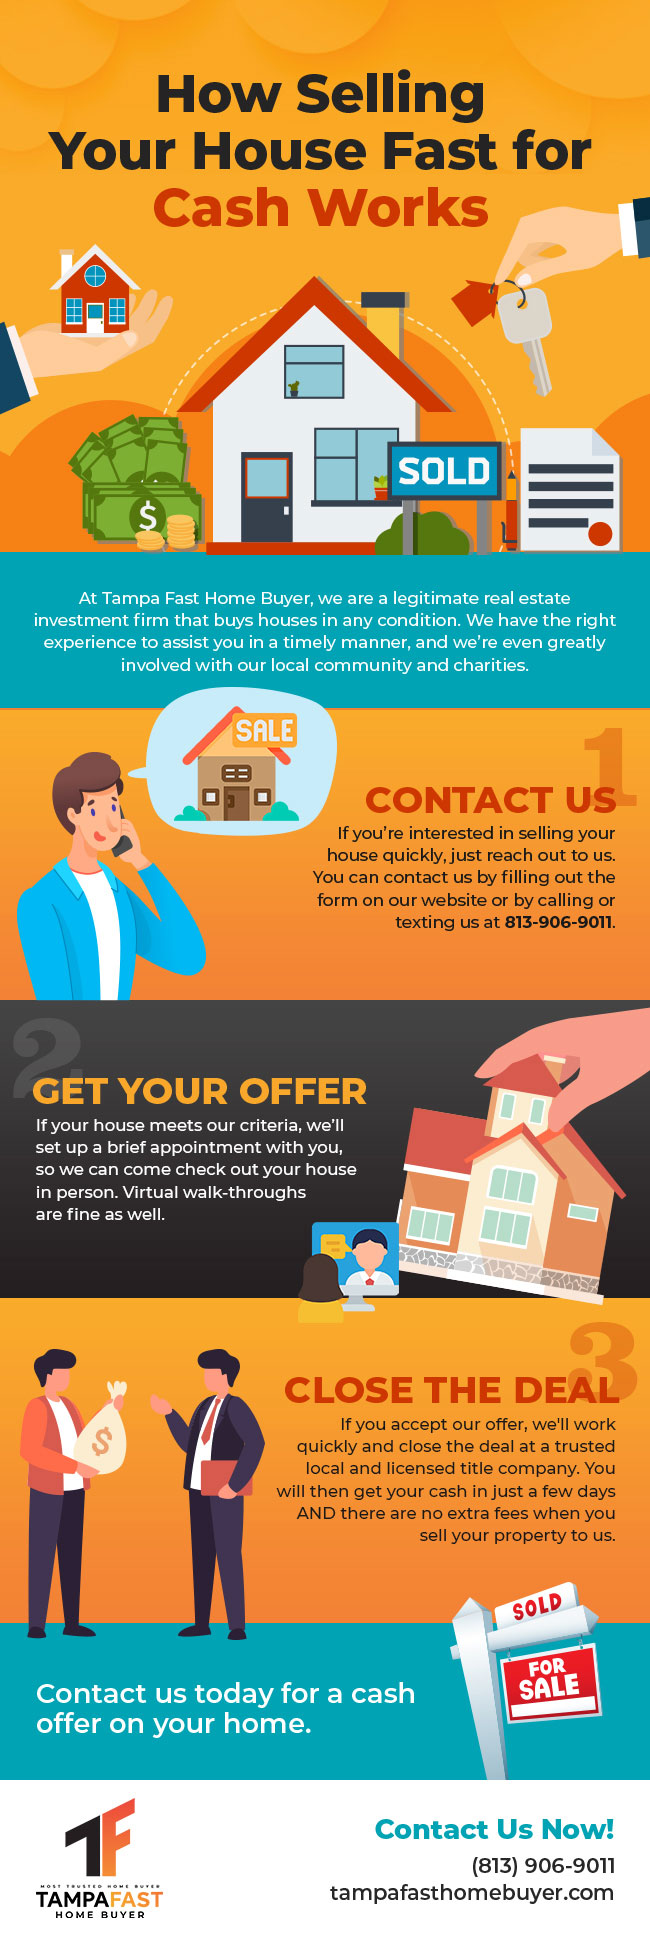 Selling your house for cash is a great way to go!